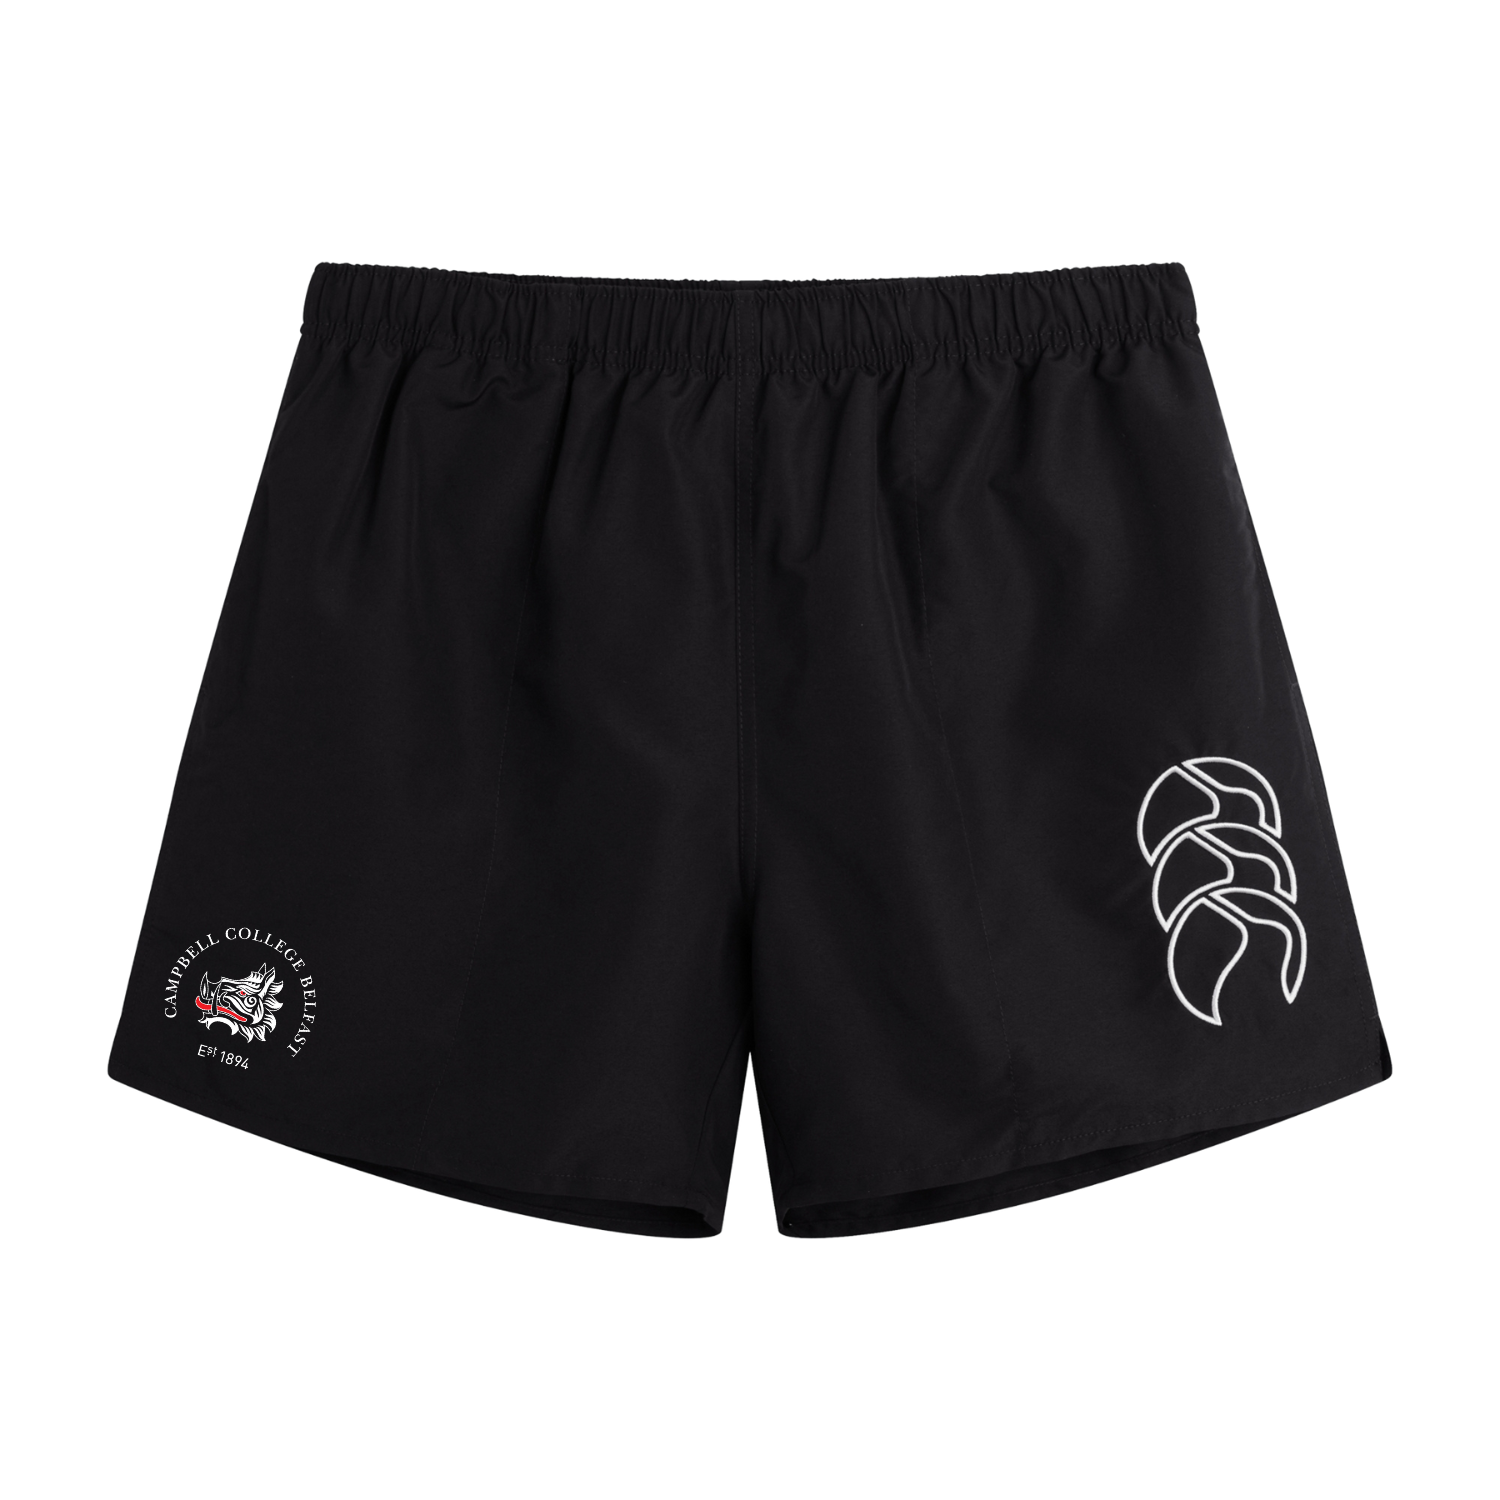 Campbell College - Training Shorts